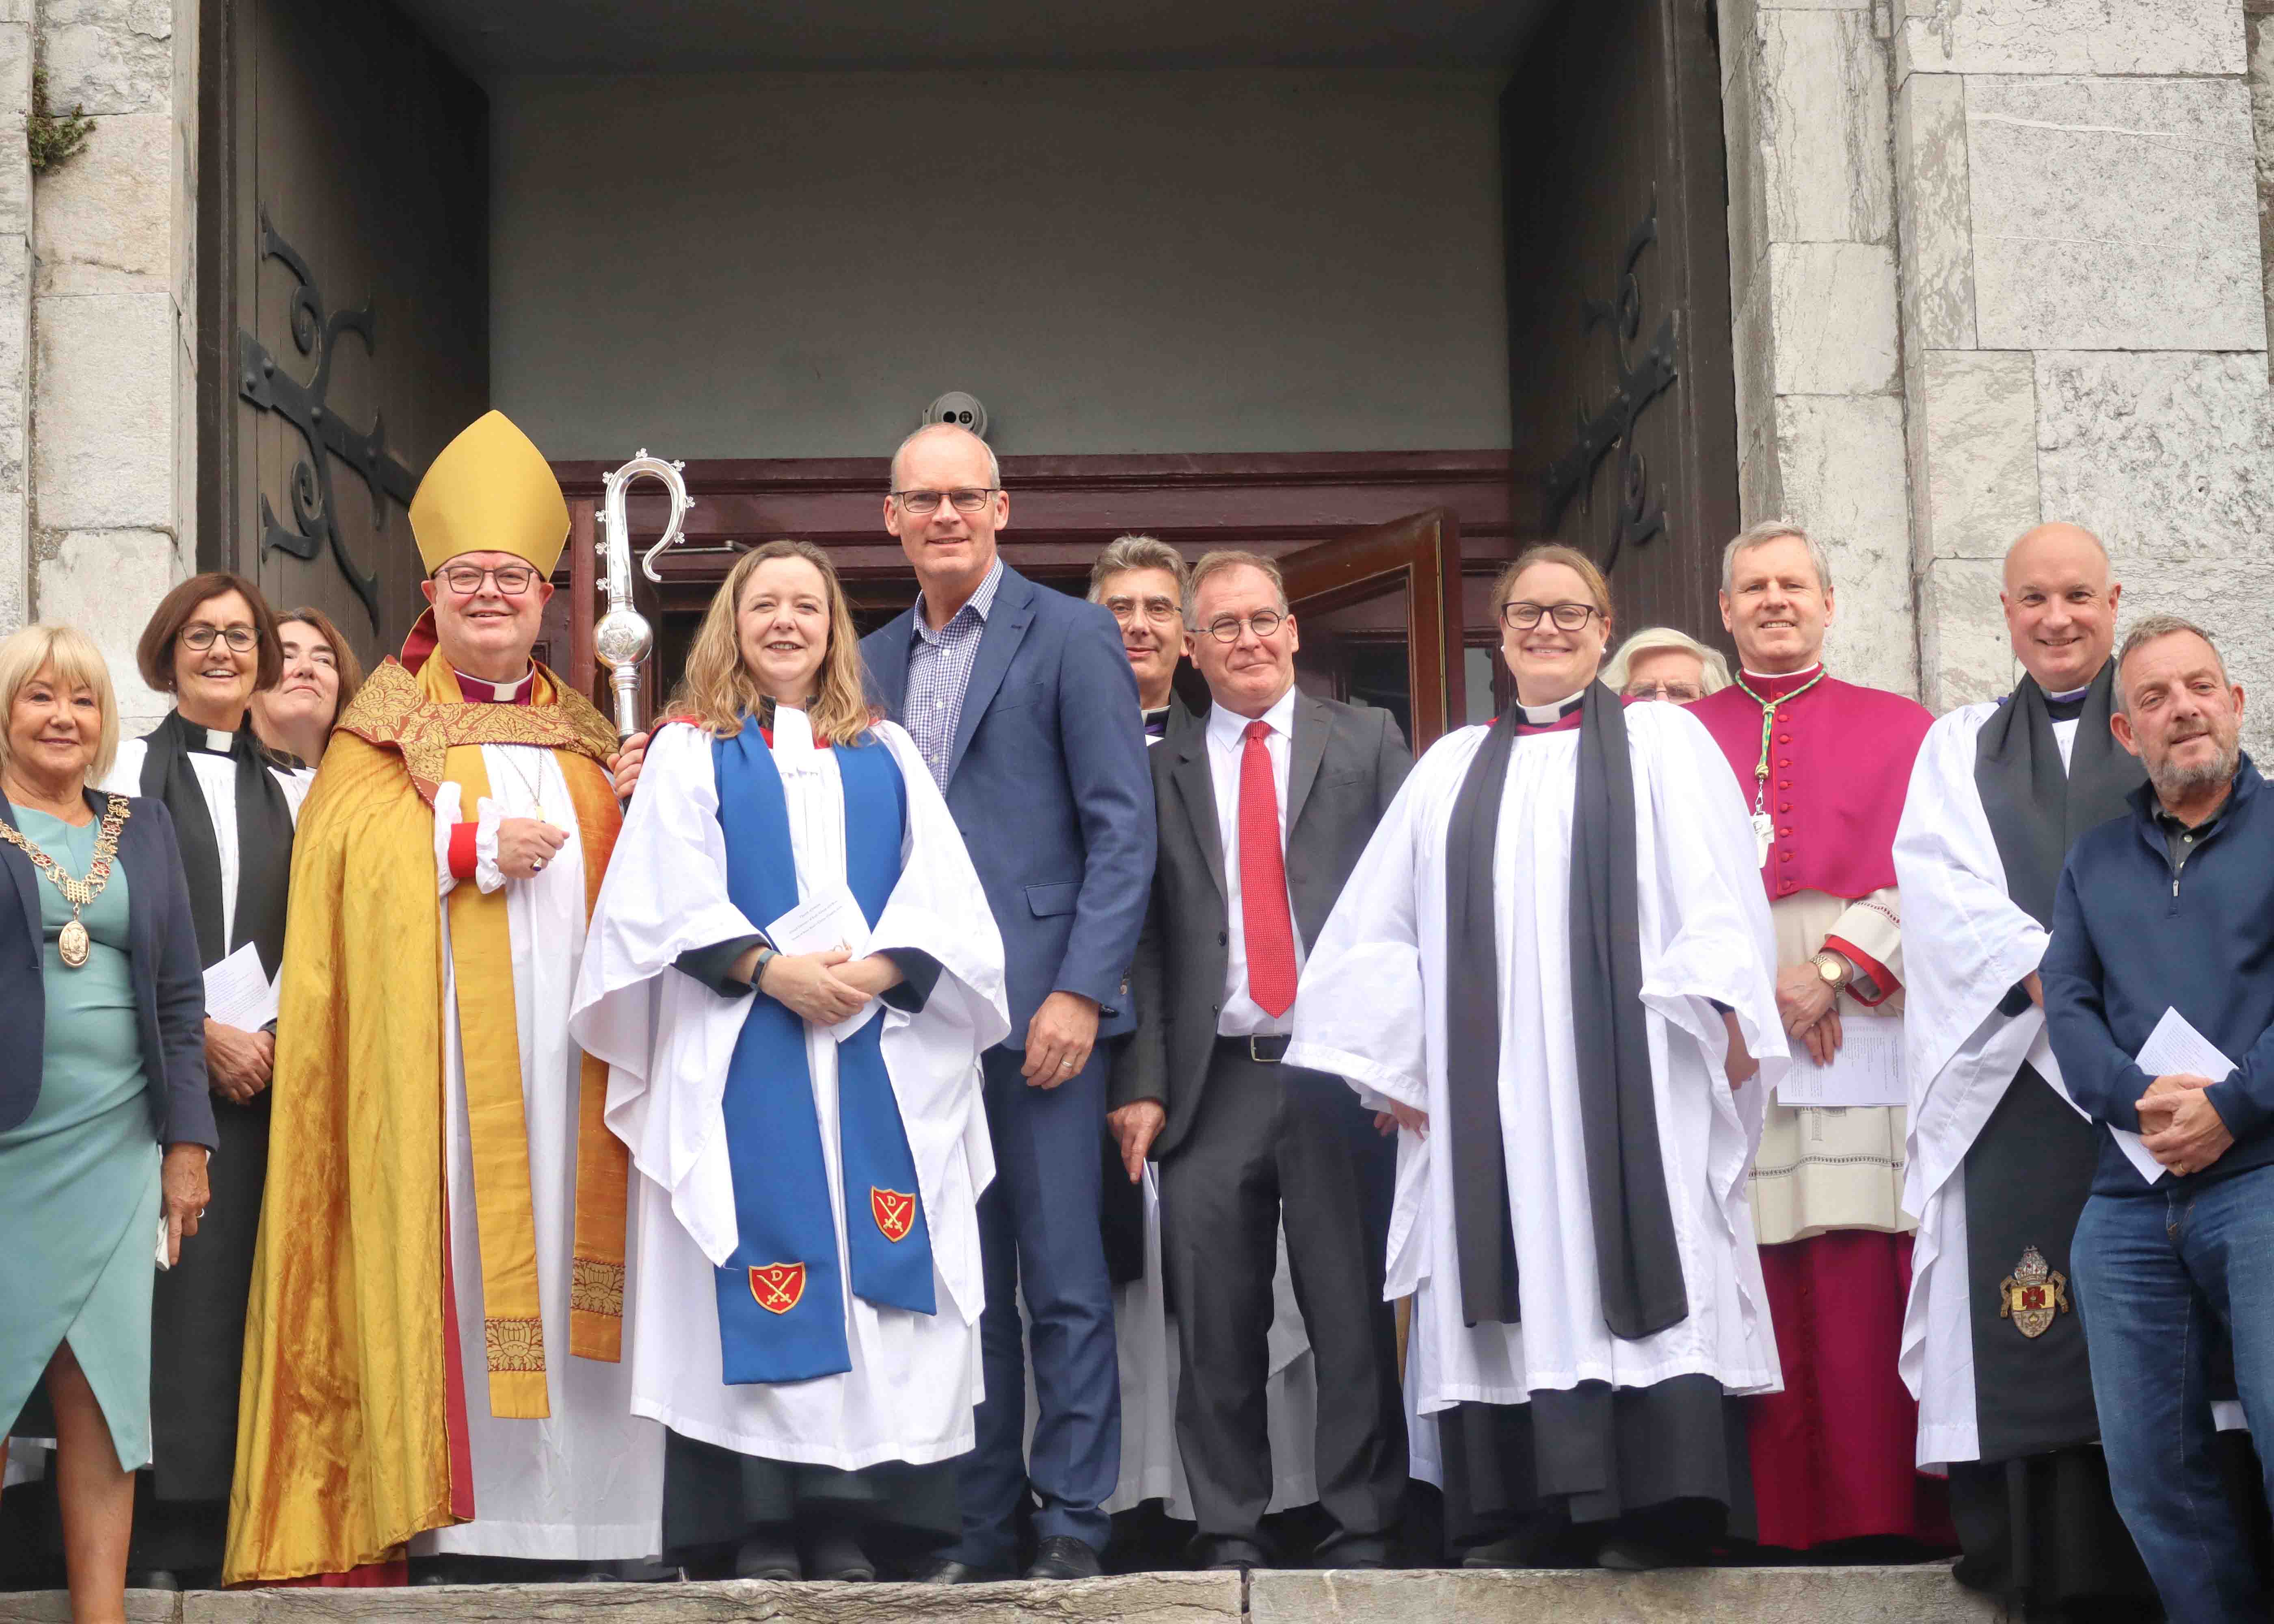 Clergy and guests after the service outside Saint Anne's Church, Shandon.